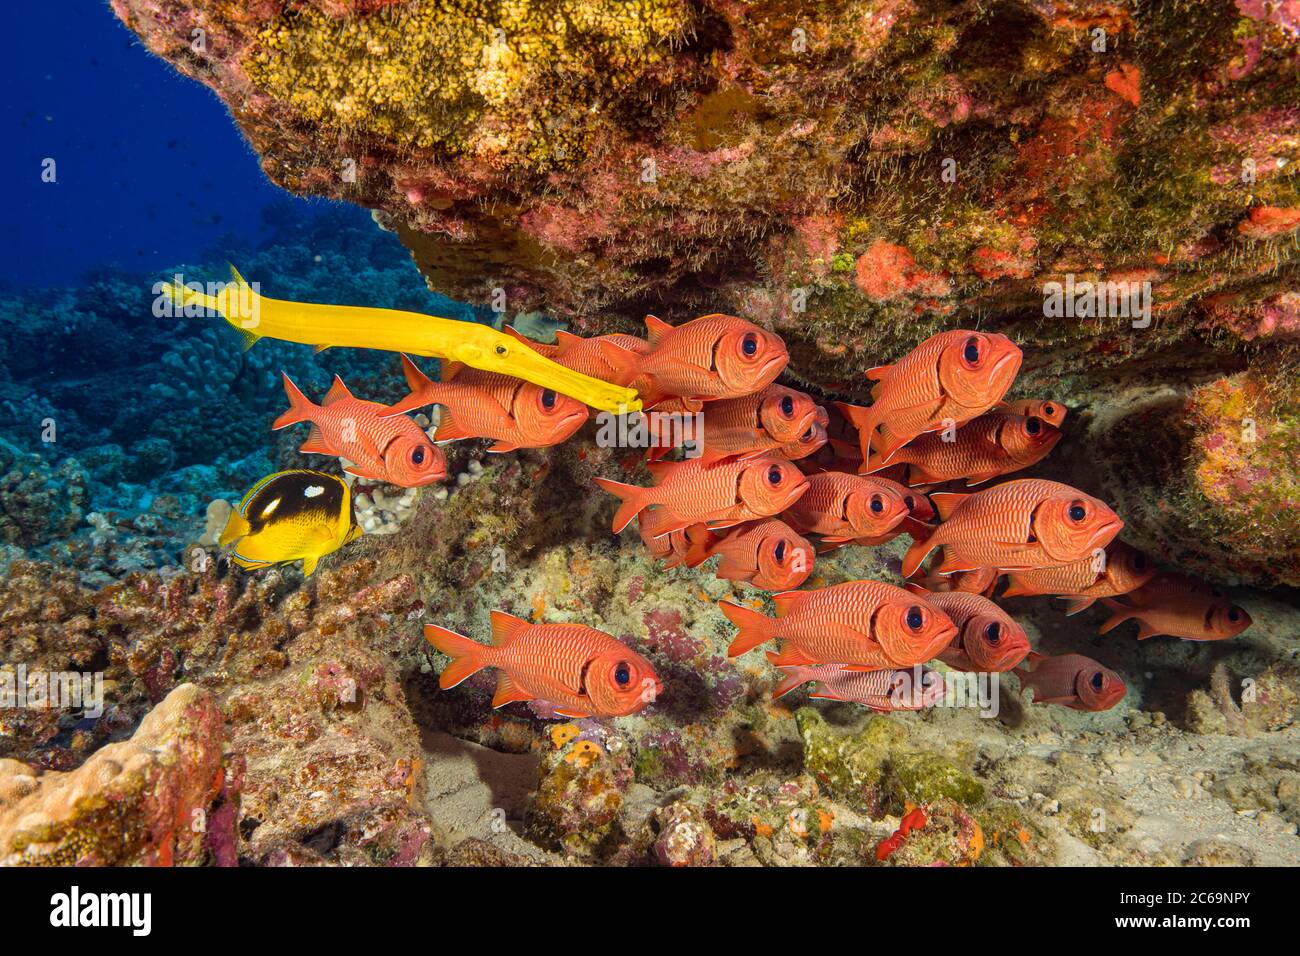 Hawaiian reef fish incuding a yellow trumpetfish, Aulostomus chinensis, fourspot butterflyfish, Chaetodon quadrimaculatus, and a school of bigscale so Stock Photo